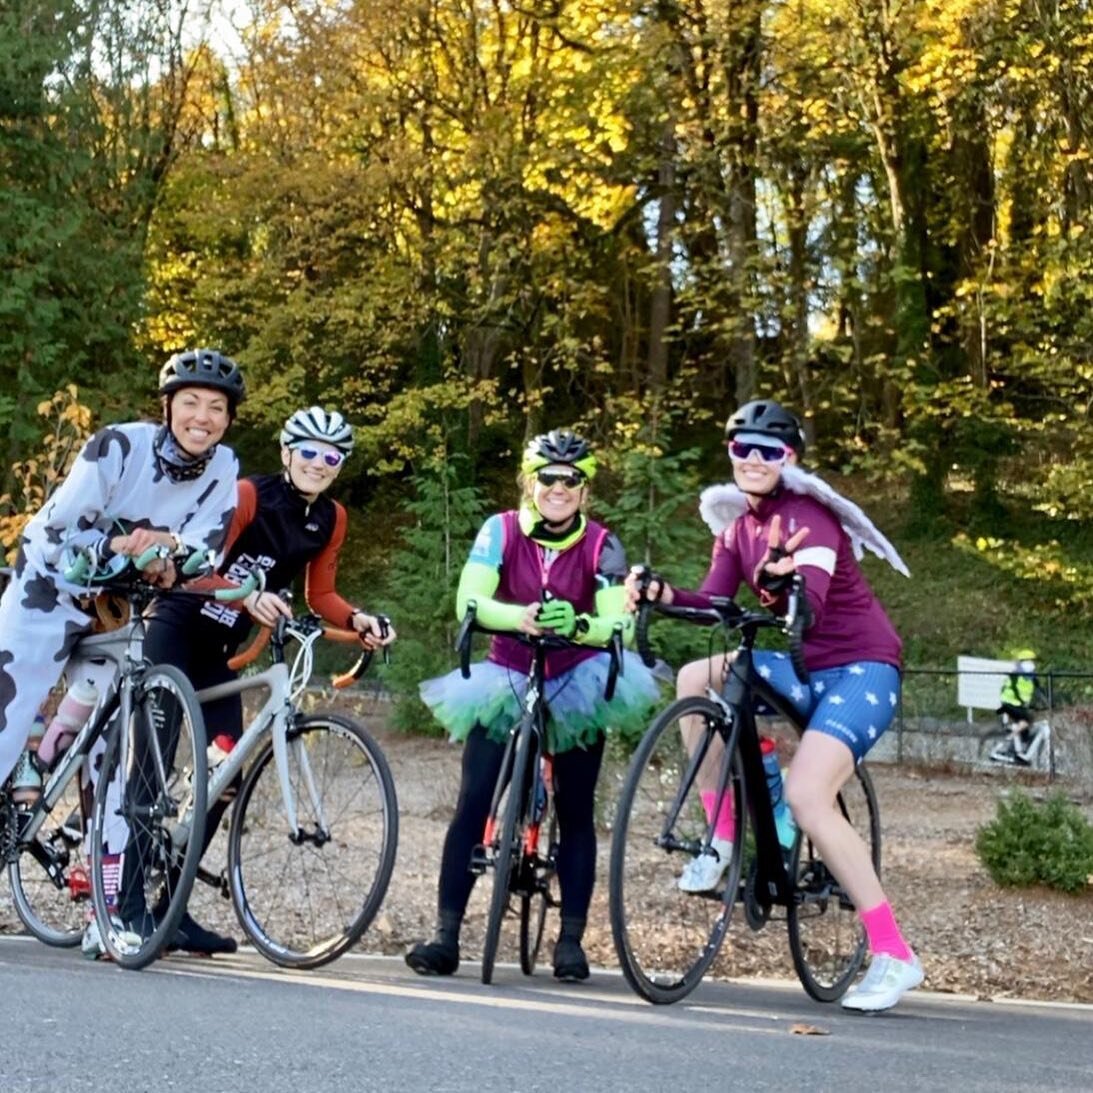 A few of the BatWomen dressed up for some Halloween hill repeats in the cemetery! Such a great afternoon with friends on this gorgeous fall day!
@alybeth26 @ironshan @ghryciw @raschy 
&bull;
&bull;
&bull;
&bull;
#batwomenpdx #swimbikerun #womenfortri